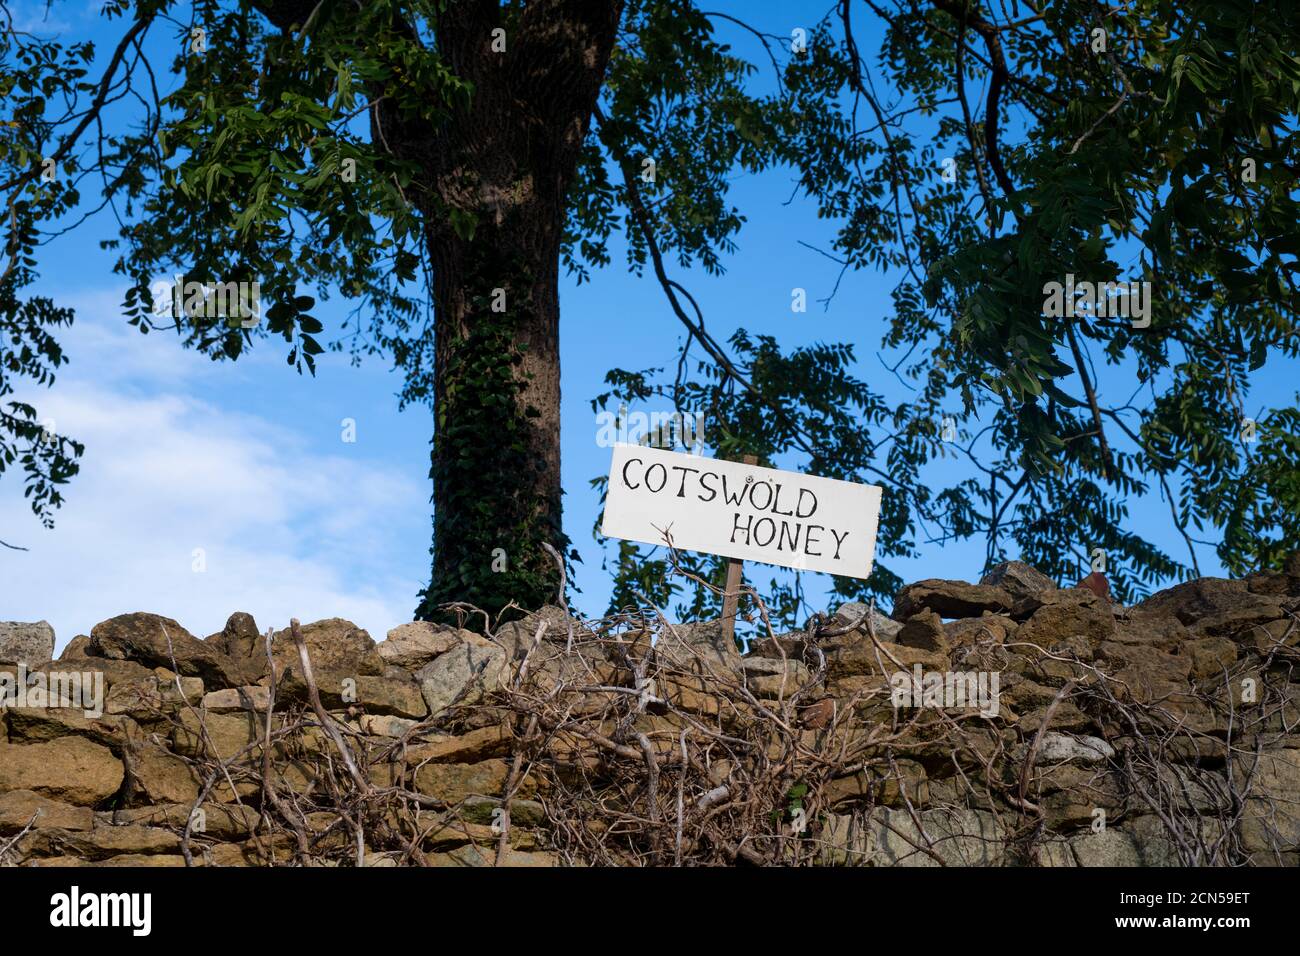 Cotswold Honigschild im Dorf Broad Campden, Cotswolds, Gloucestershire, England Stockfoto